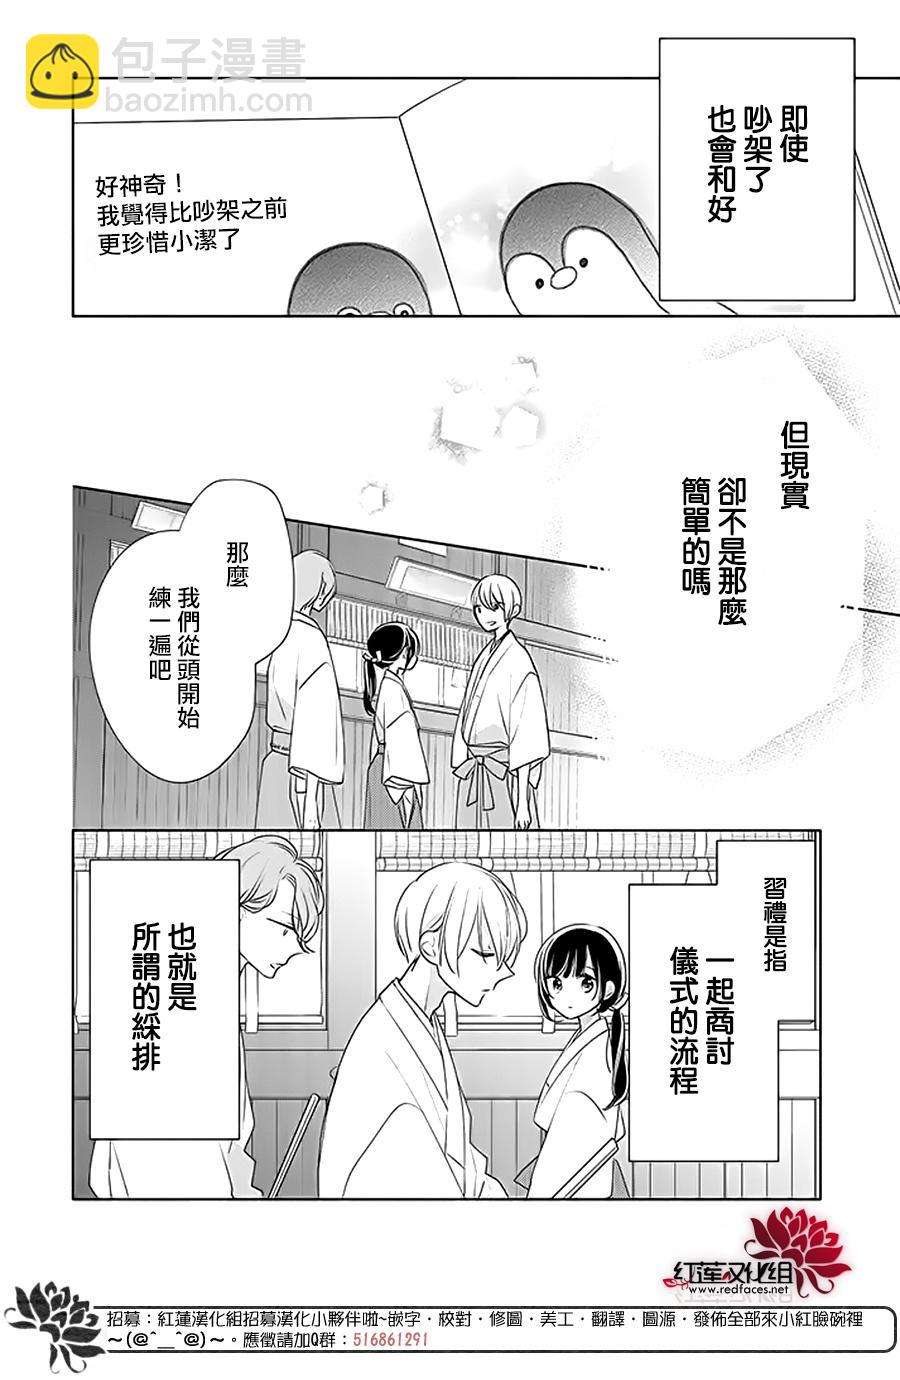 If given a second chance - 28話 - 6